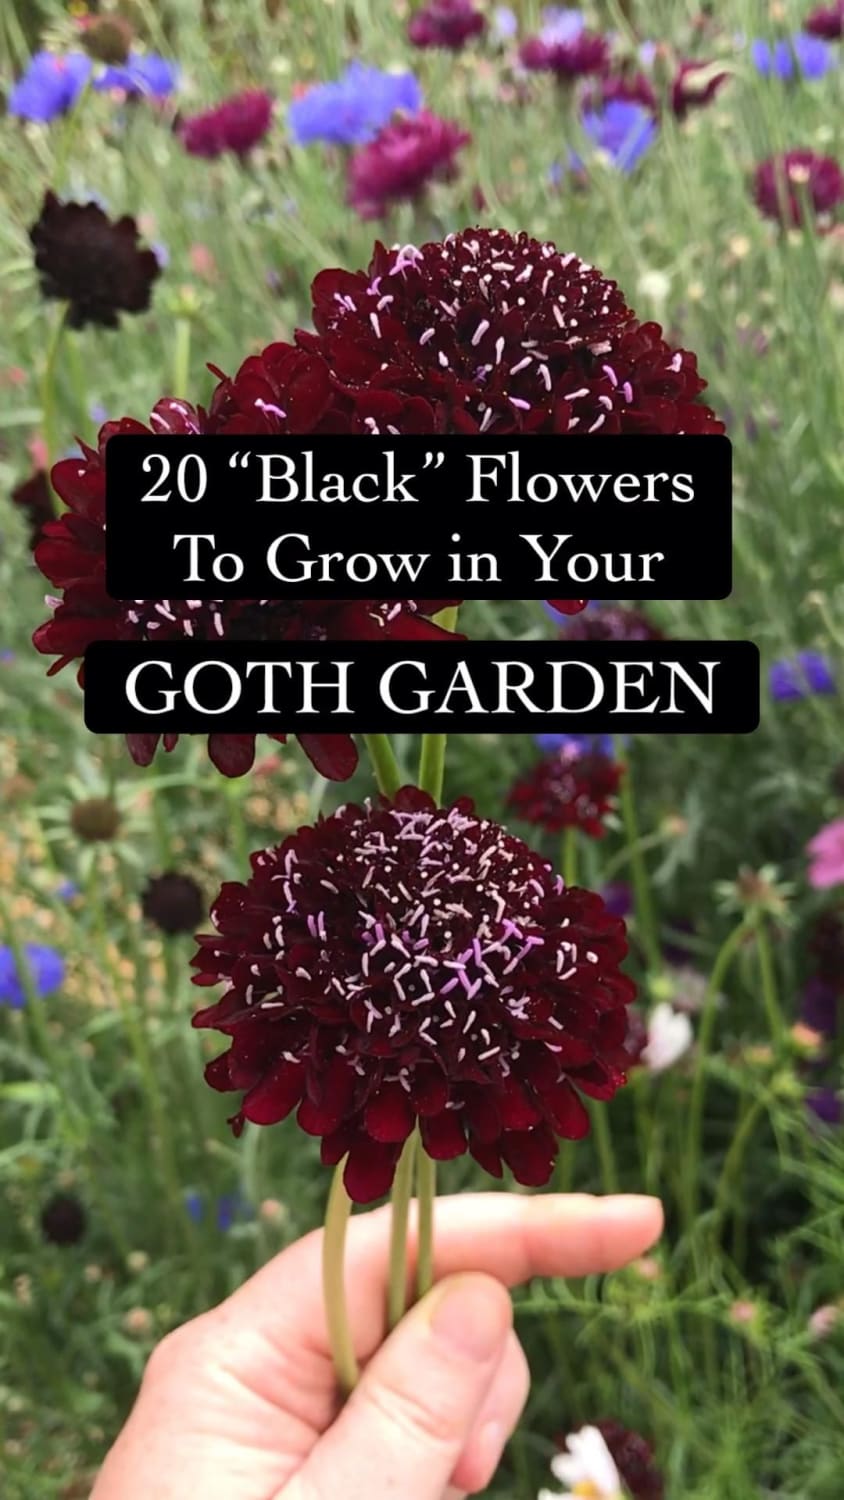 20 “Black” Flowers to Grow in Your Goth Garden